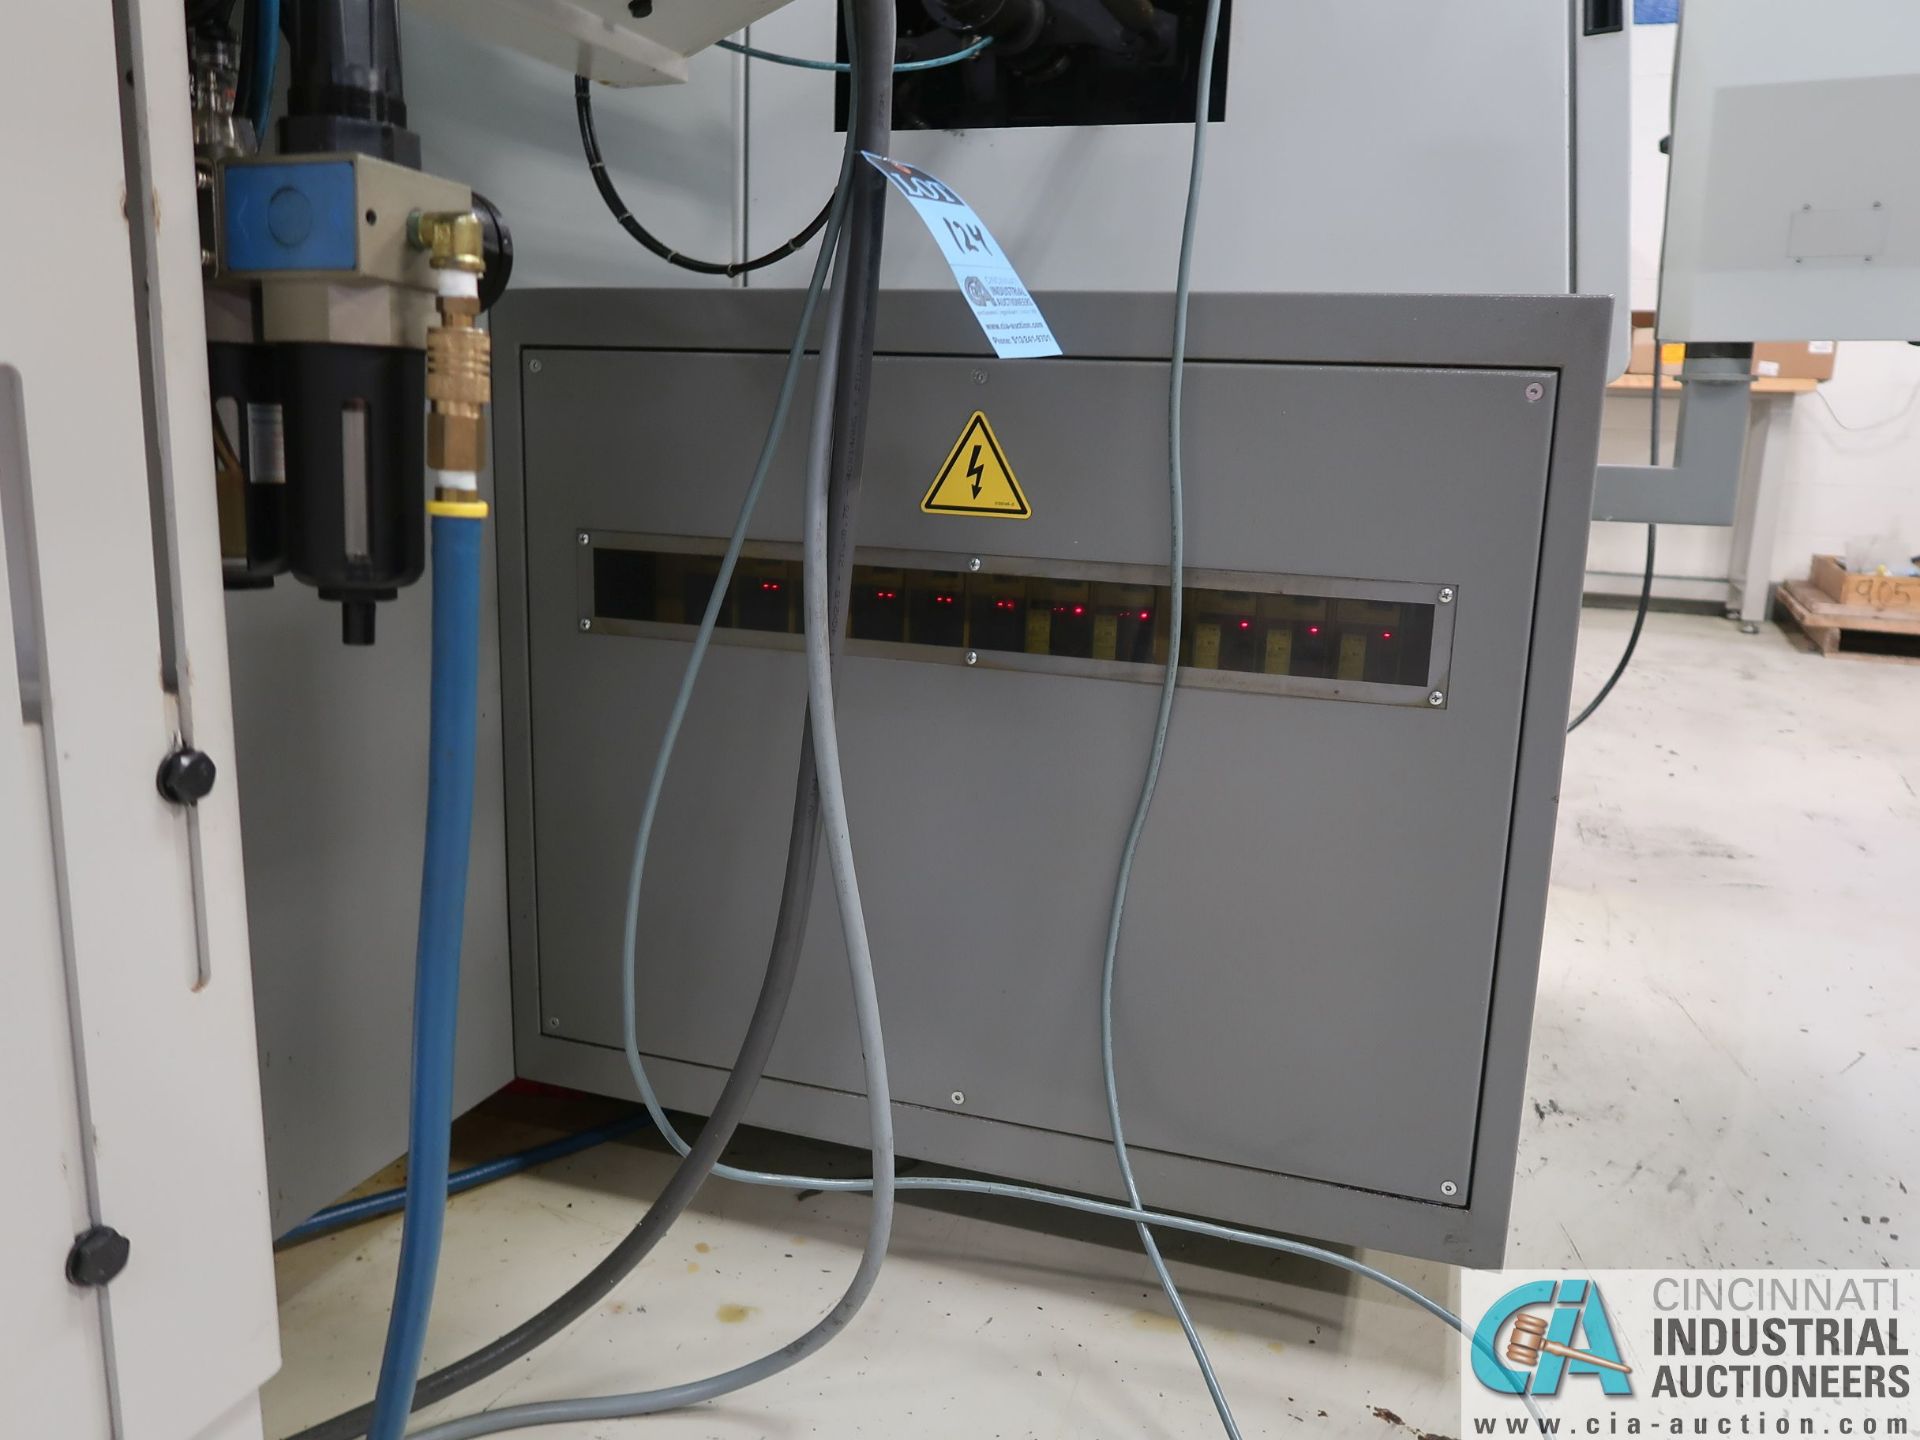 DMG GILDEMEISTER MODEL SPEED 20-11 LINEAR 11-AXIS SWISS CNC TURNING CENTER; S/N 8085012057B, FANUC - Image 26 of 27